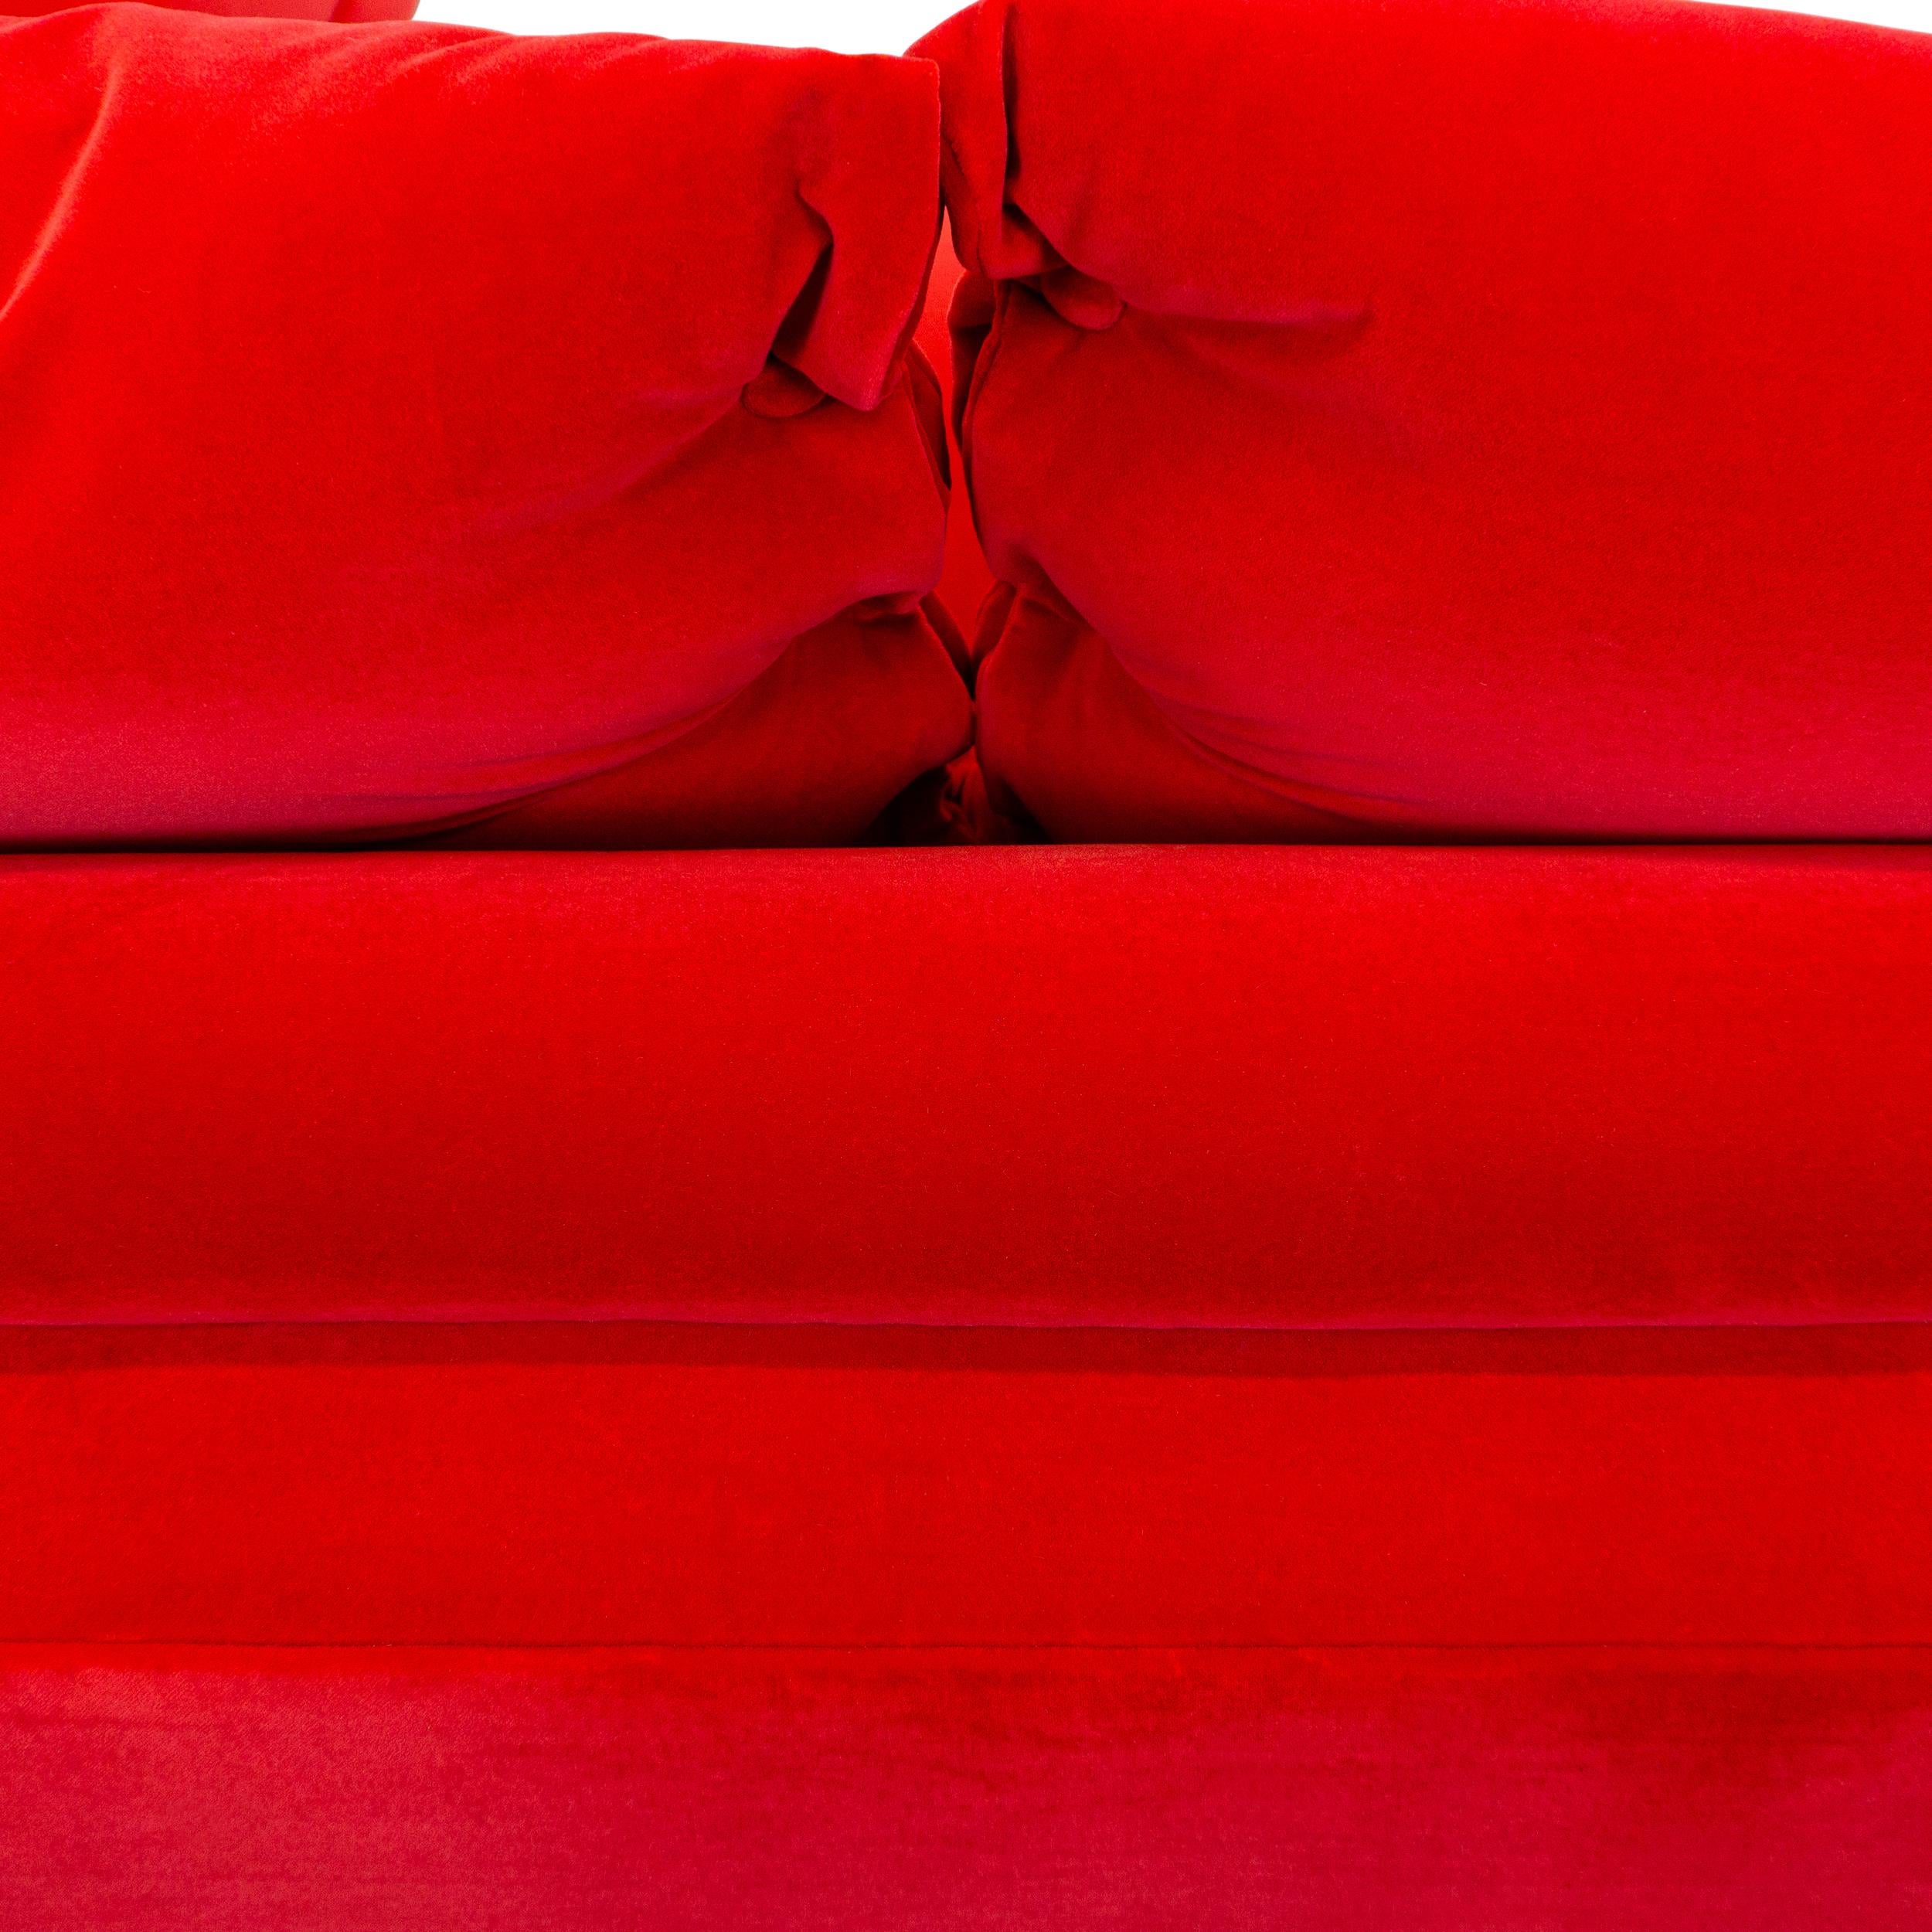 Modern L Sectional with Inside Curve, Button Pillows and Bright Red Velvet For Sale 7